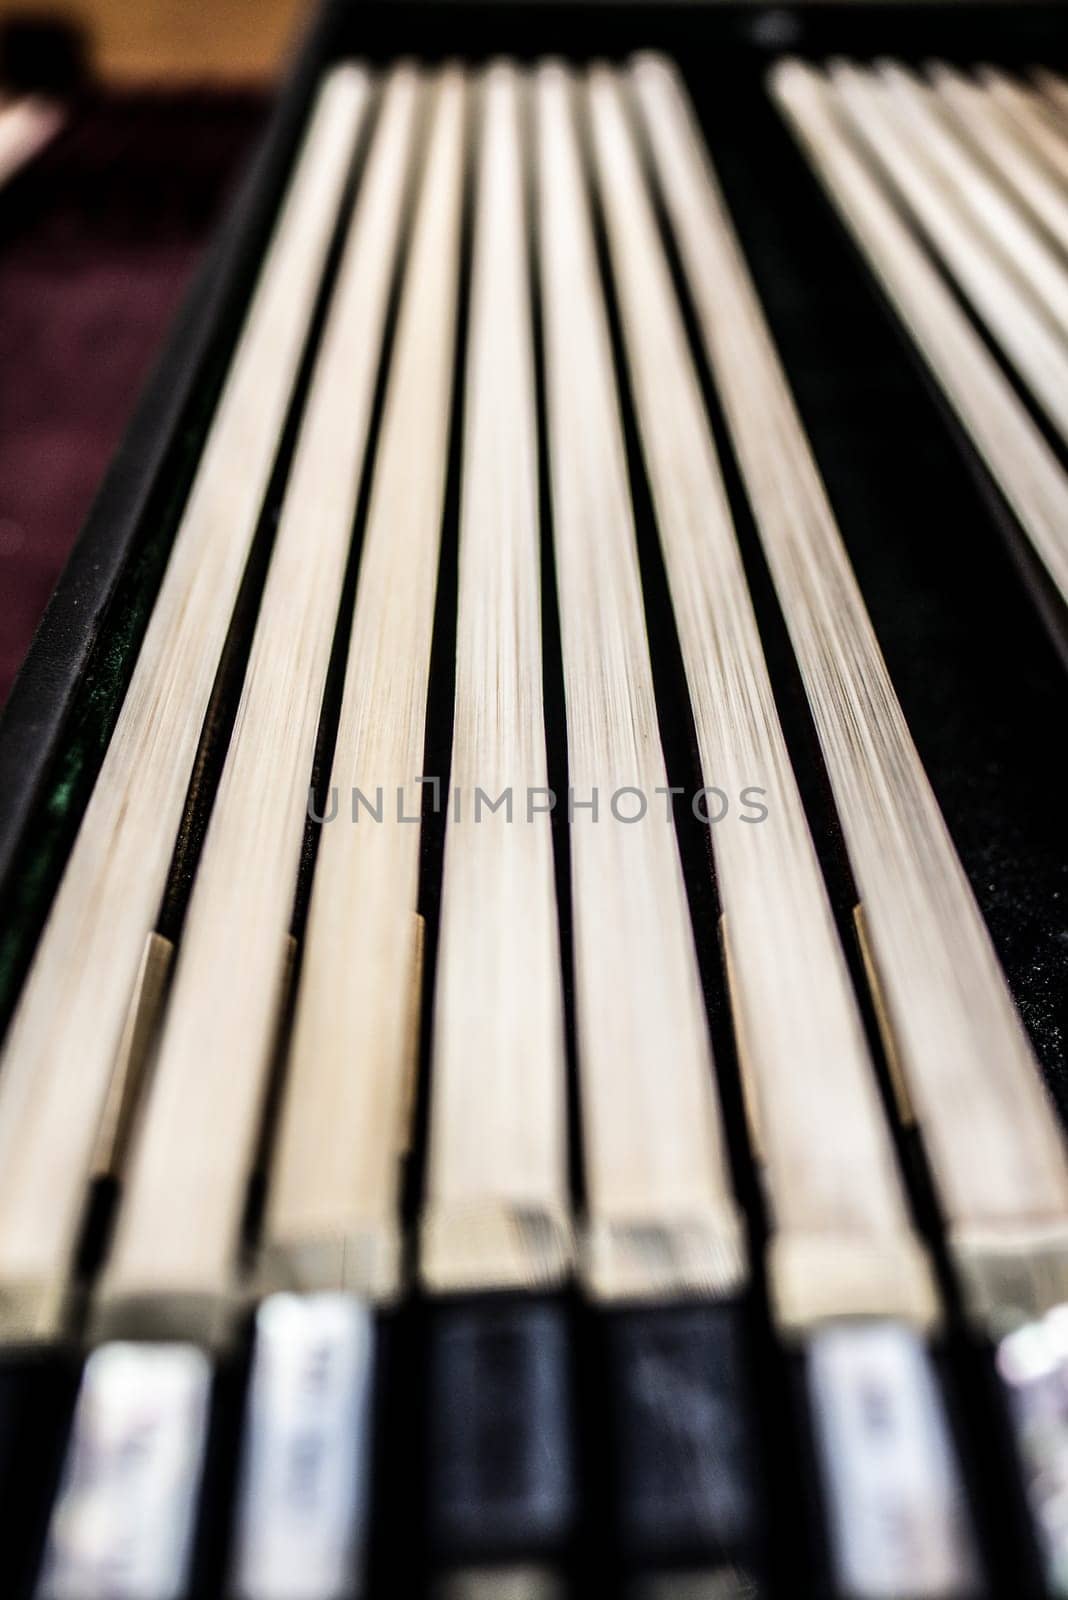 Many violin bows are laying in a row on the desk by iansaf